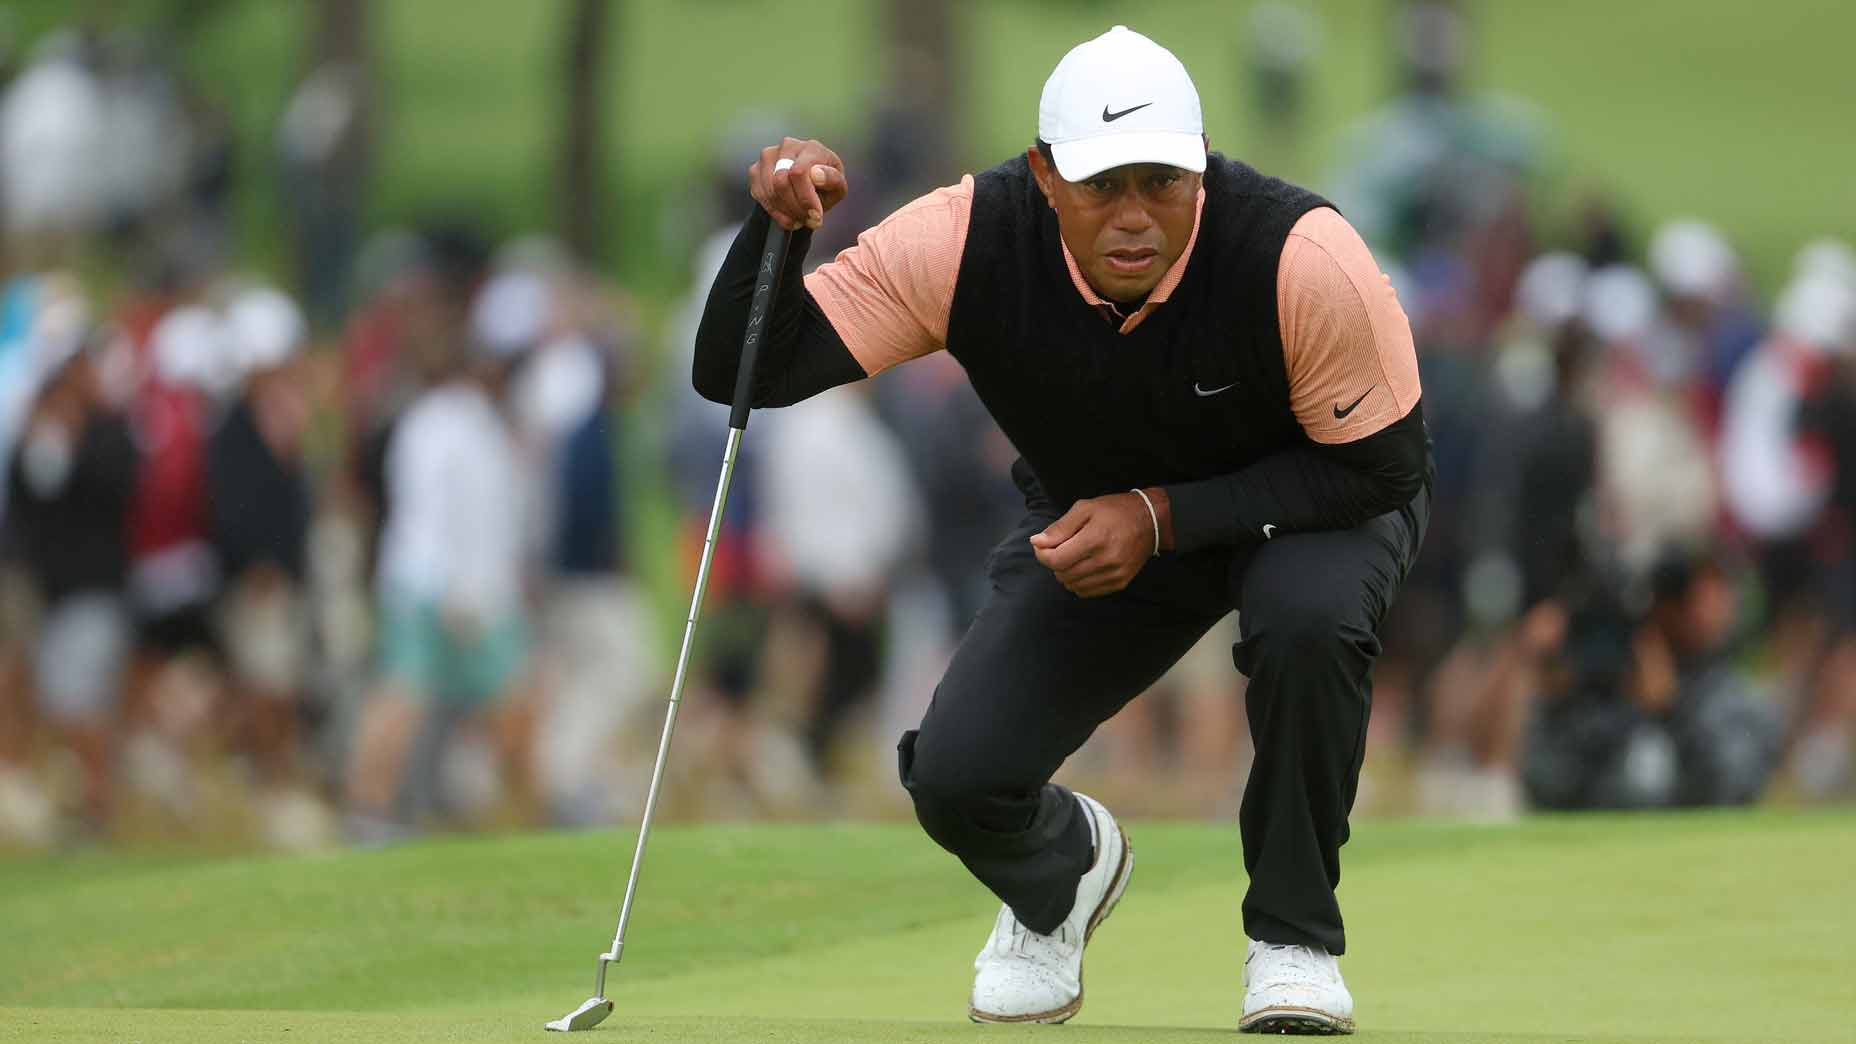 Tiger Woods withdrew after his third round at the PGA Championship.